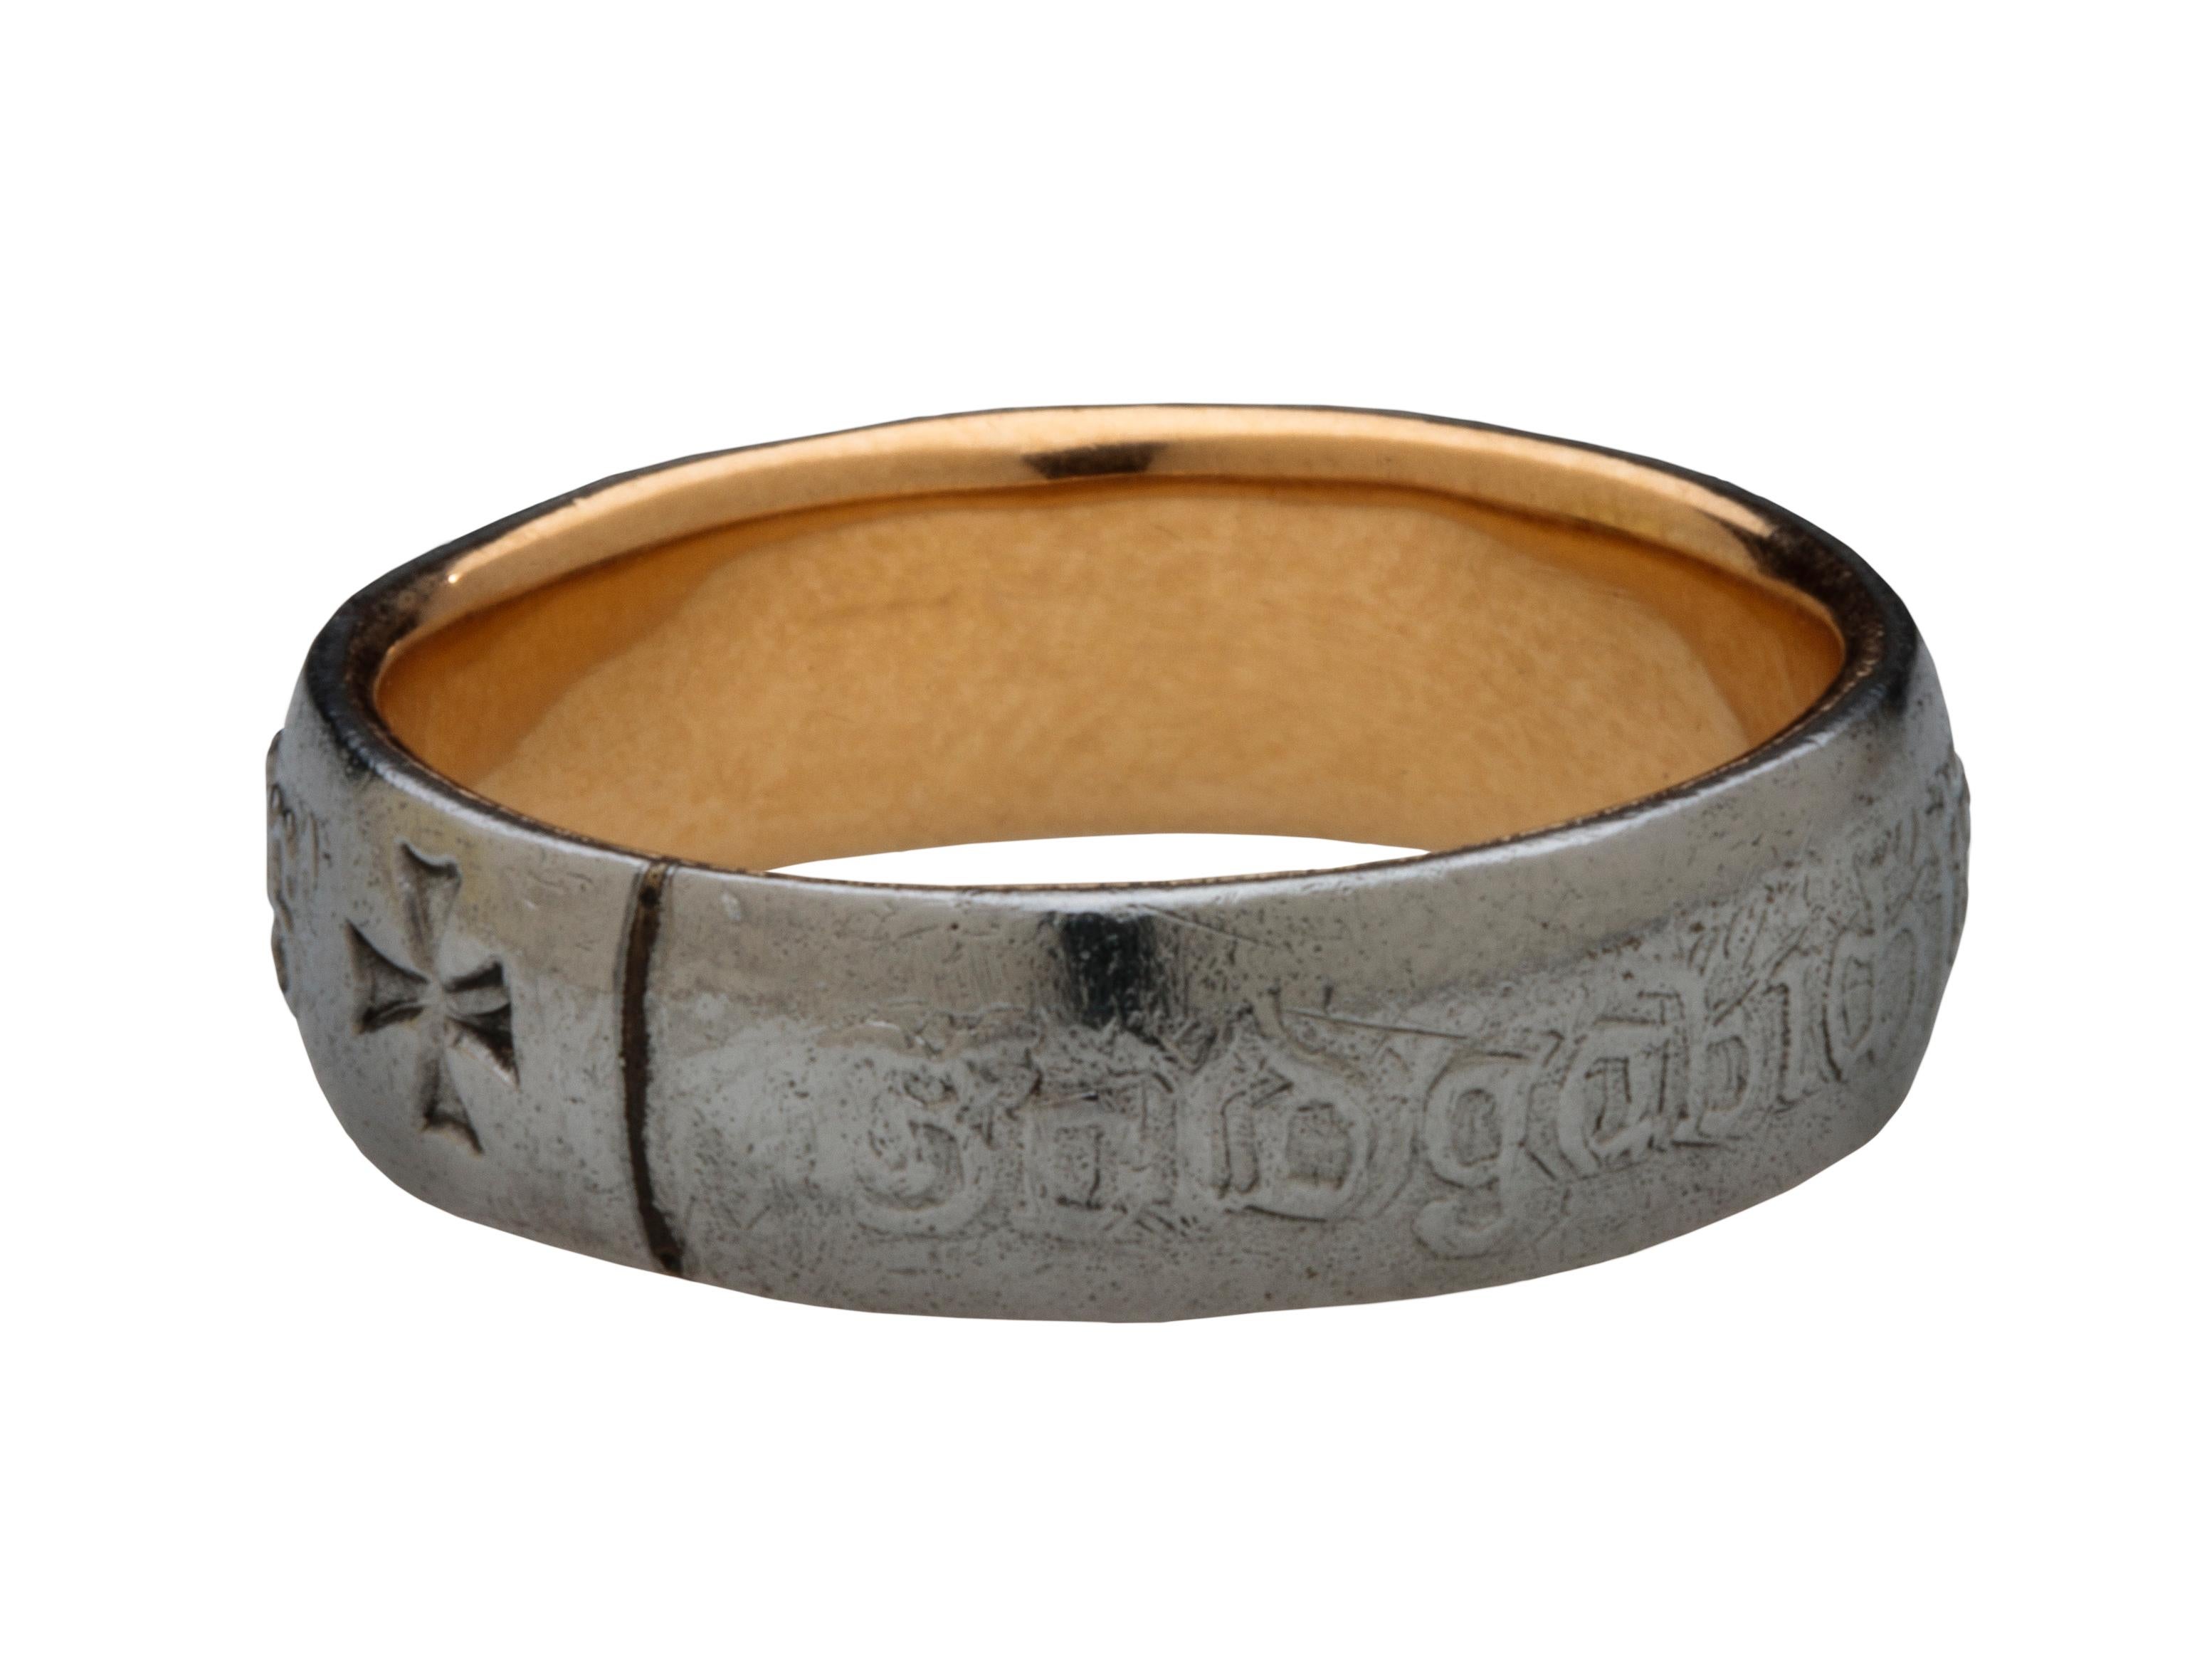 First World War (or Patriotic) Iron Ring with a Cross and Inscription “Gold gab ich für Eisen”
Austro-Hungarian Empire or Germany, circa 1914
Gold and Iron
Outer diameter 21 mm., width of band 6 mm.
Weight 4.2 gr., US size 7.75, UK size P 1/2

On